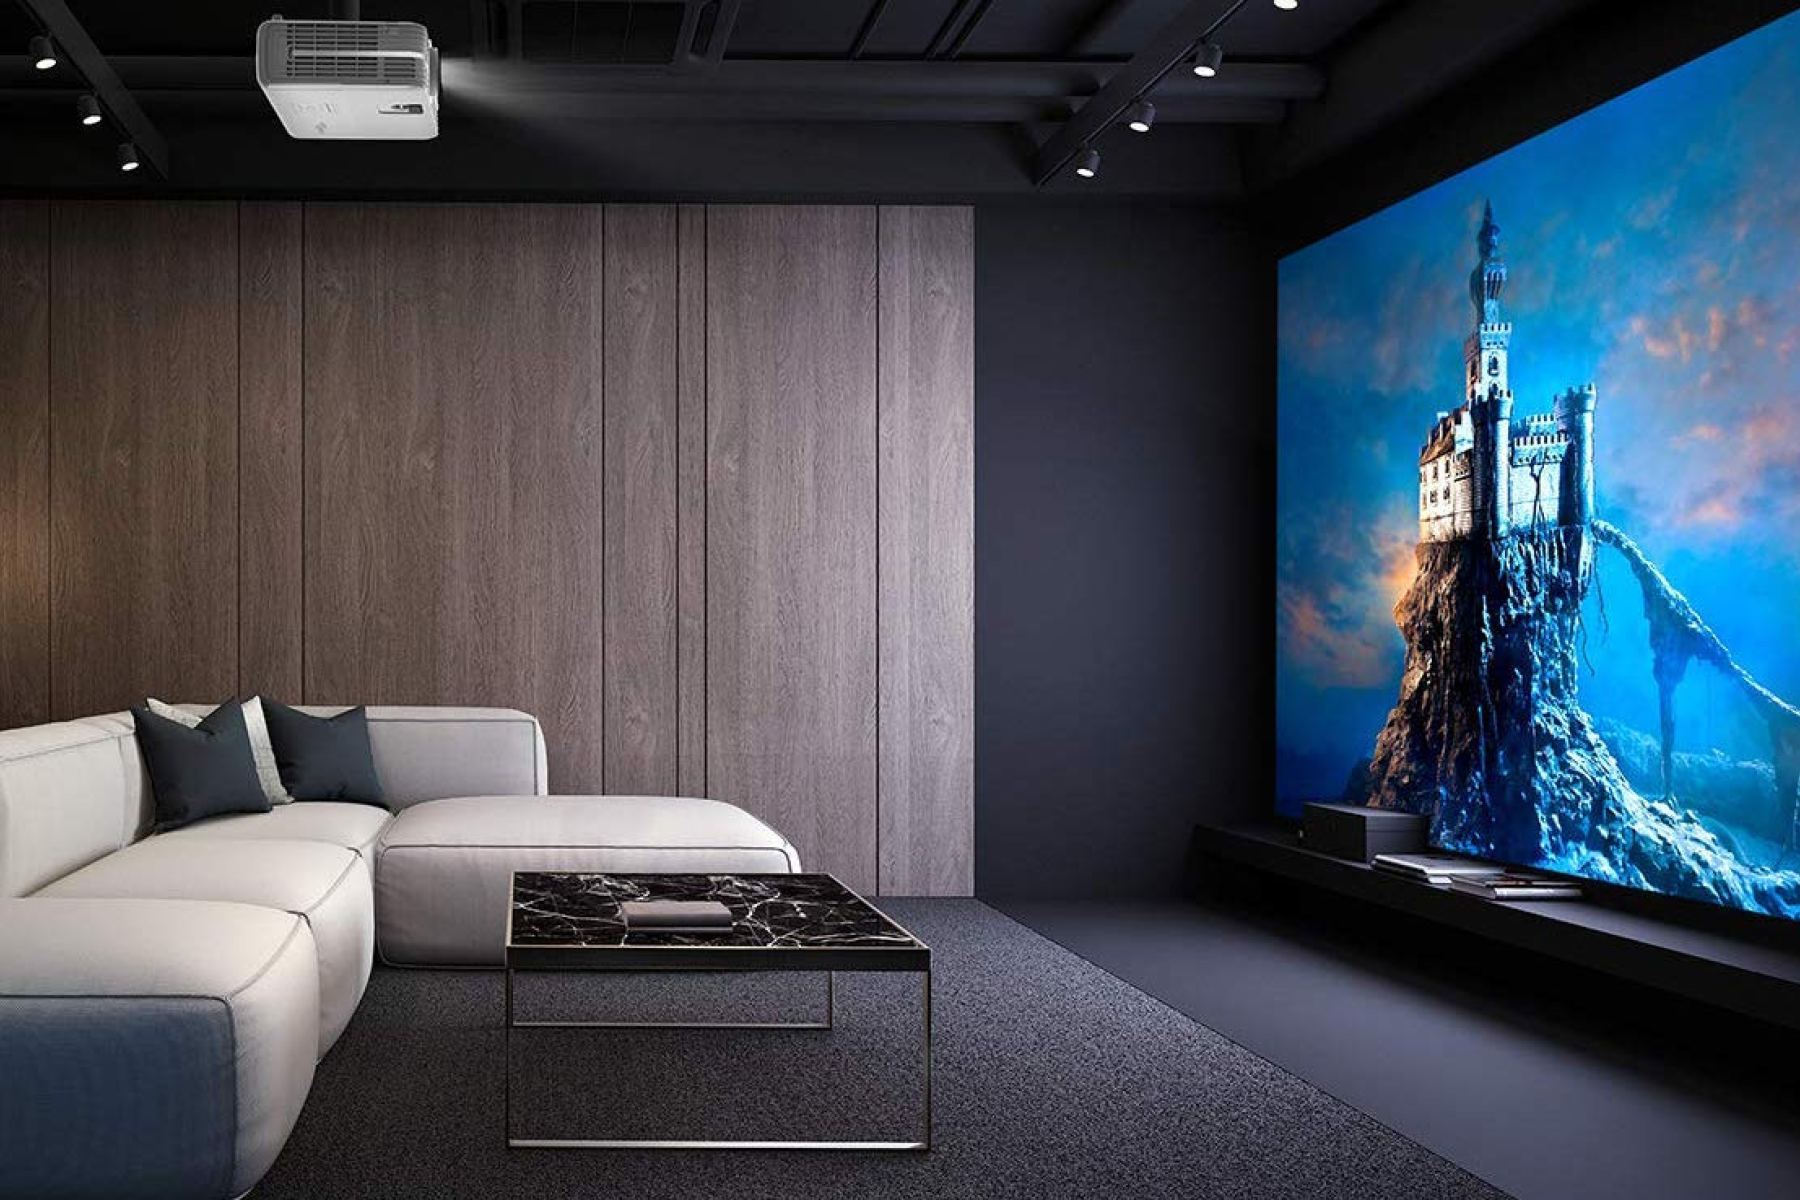 Best Projectors 2021 The Home Cinema Projectors Worth Buying to change